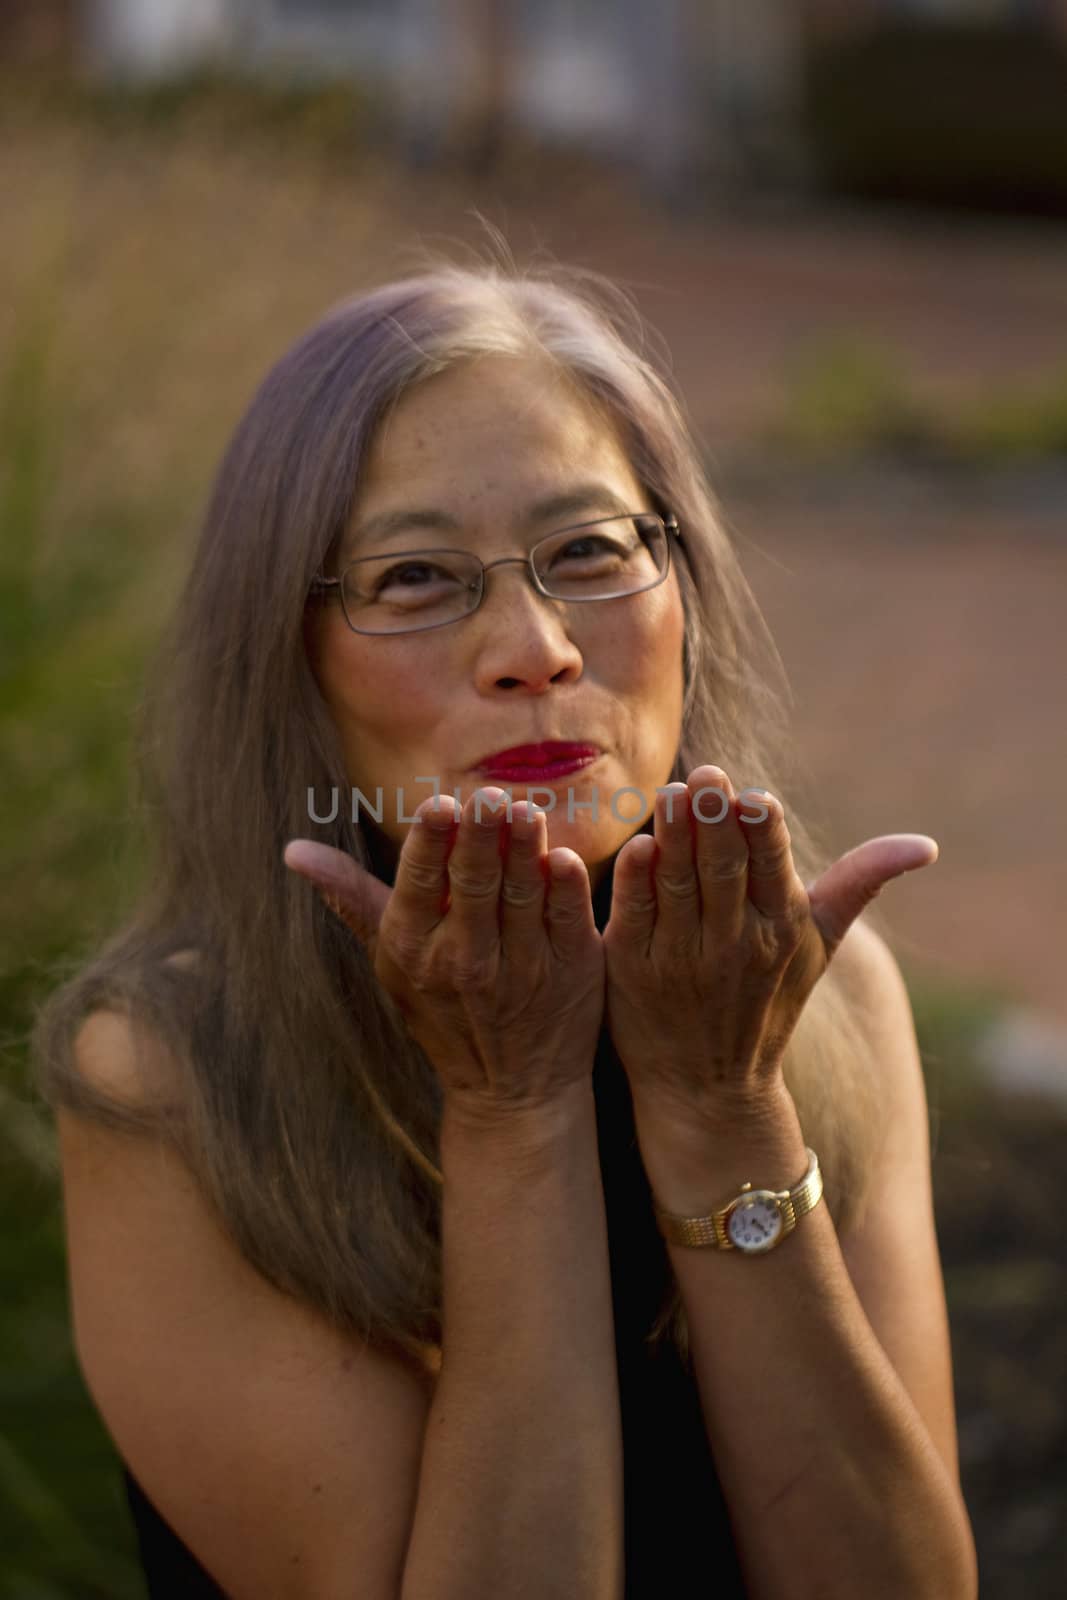 Asian woman with long, gray hair raises her hands to blow kisses